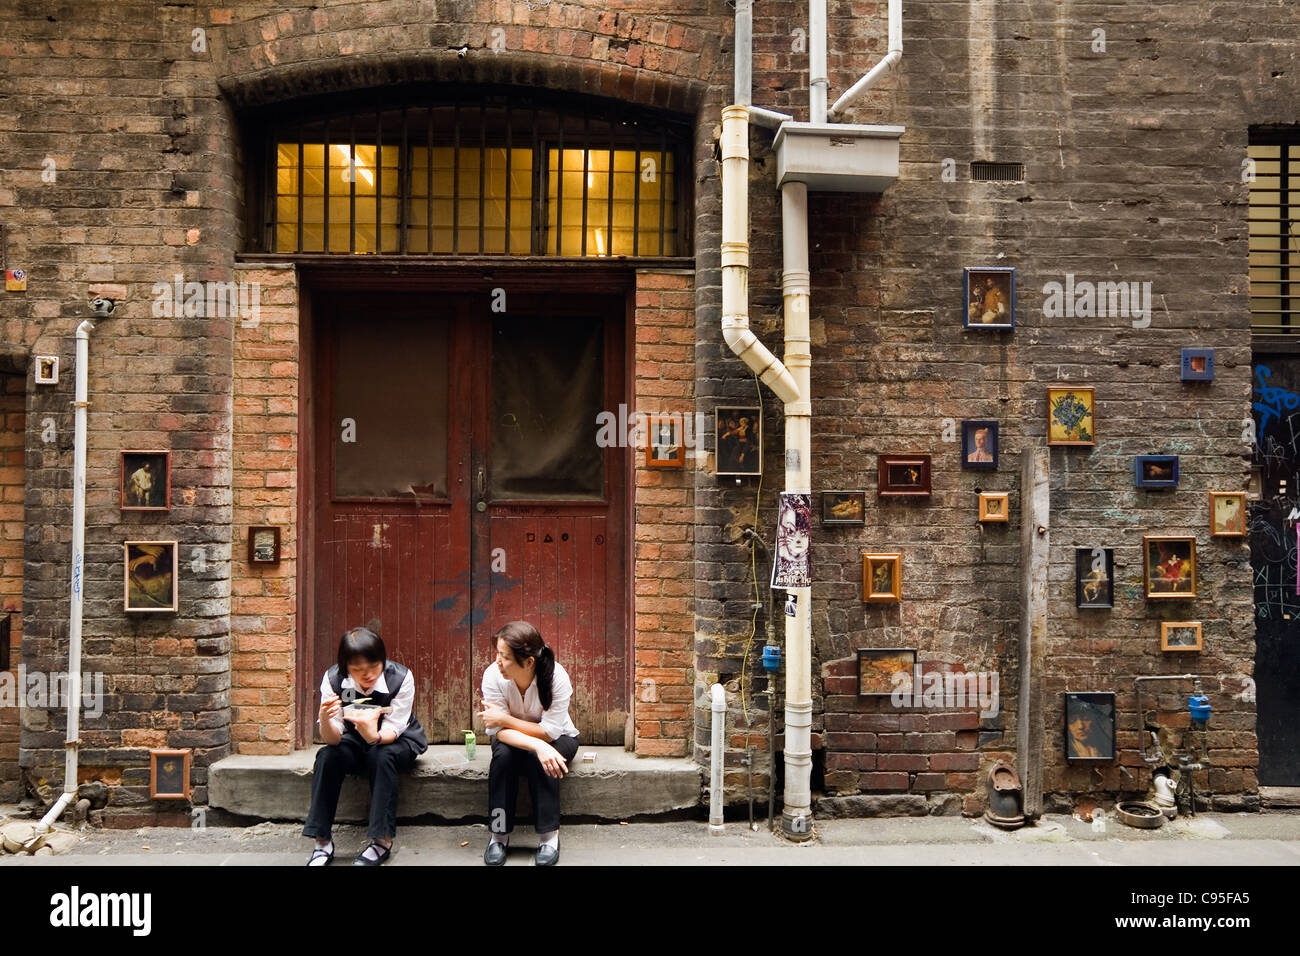 Workers have a break in one of Melbourne's laneways, lined with street art. Melbourne, Victoria, Australia Stock Photo